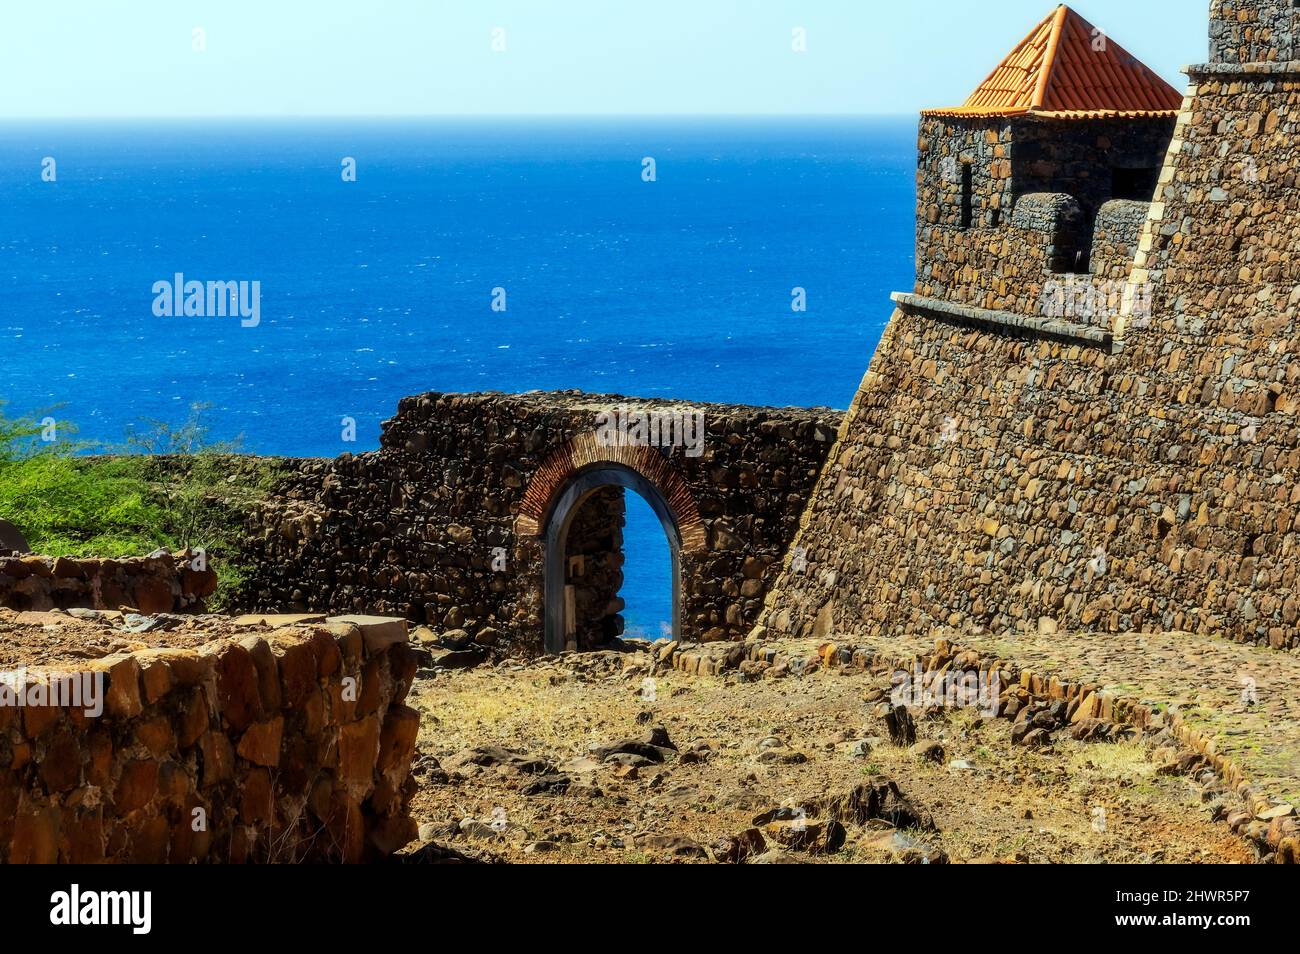 Cape Verde, Sao Vicente, Mindelo, Fortified walls of coastal city with Atlantic Ocean in background Stock Photo